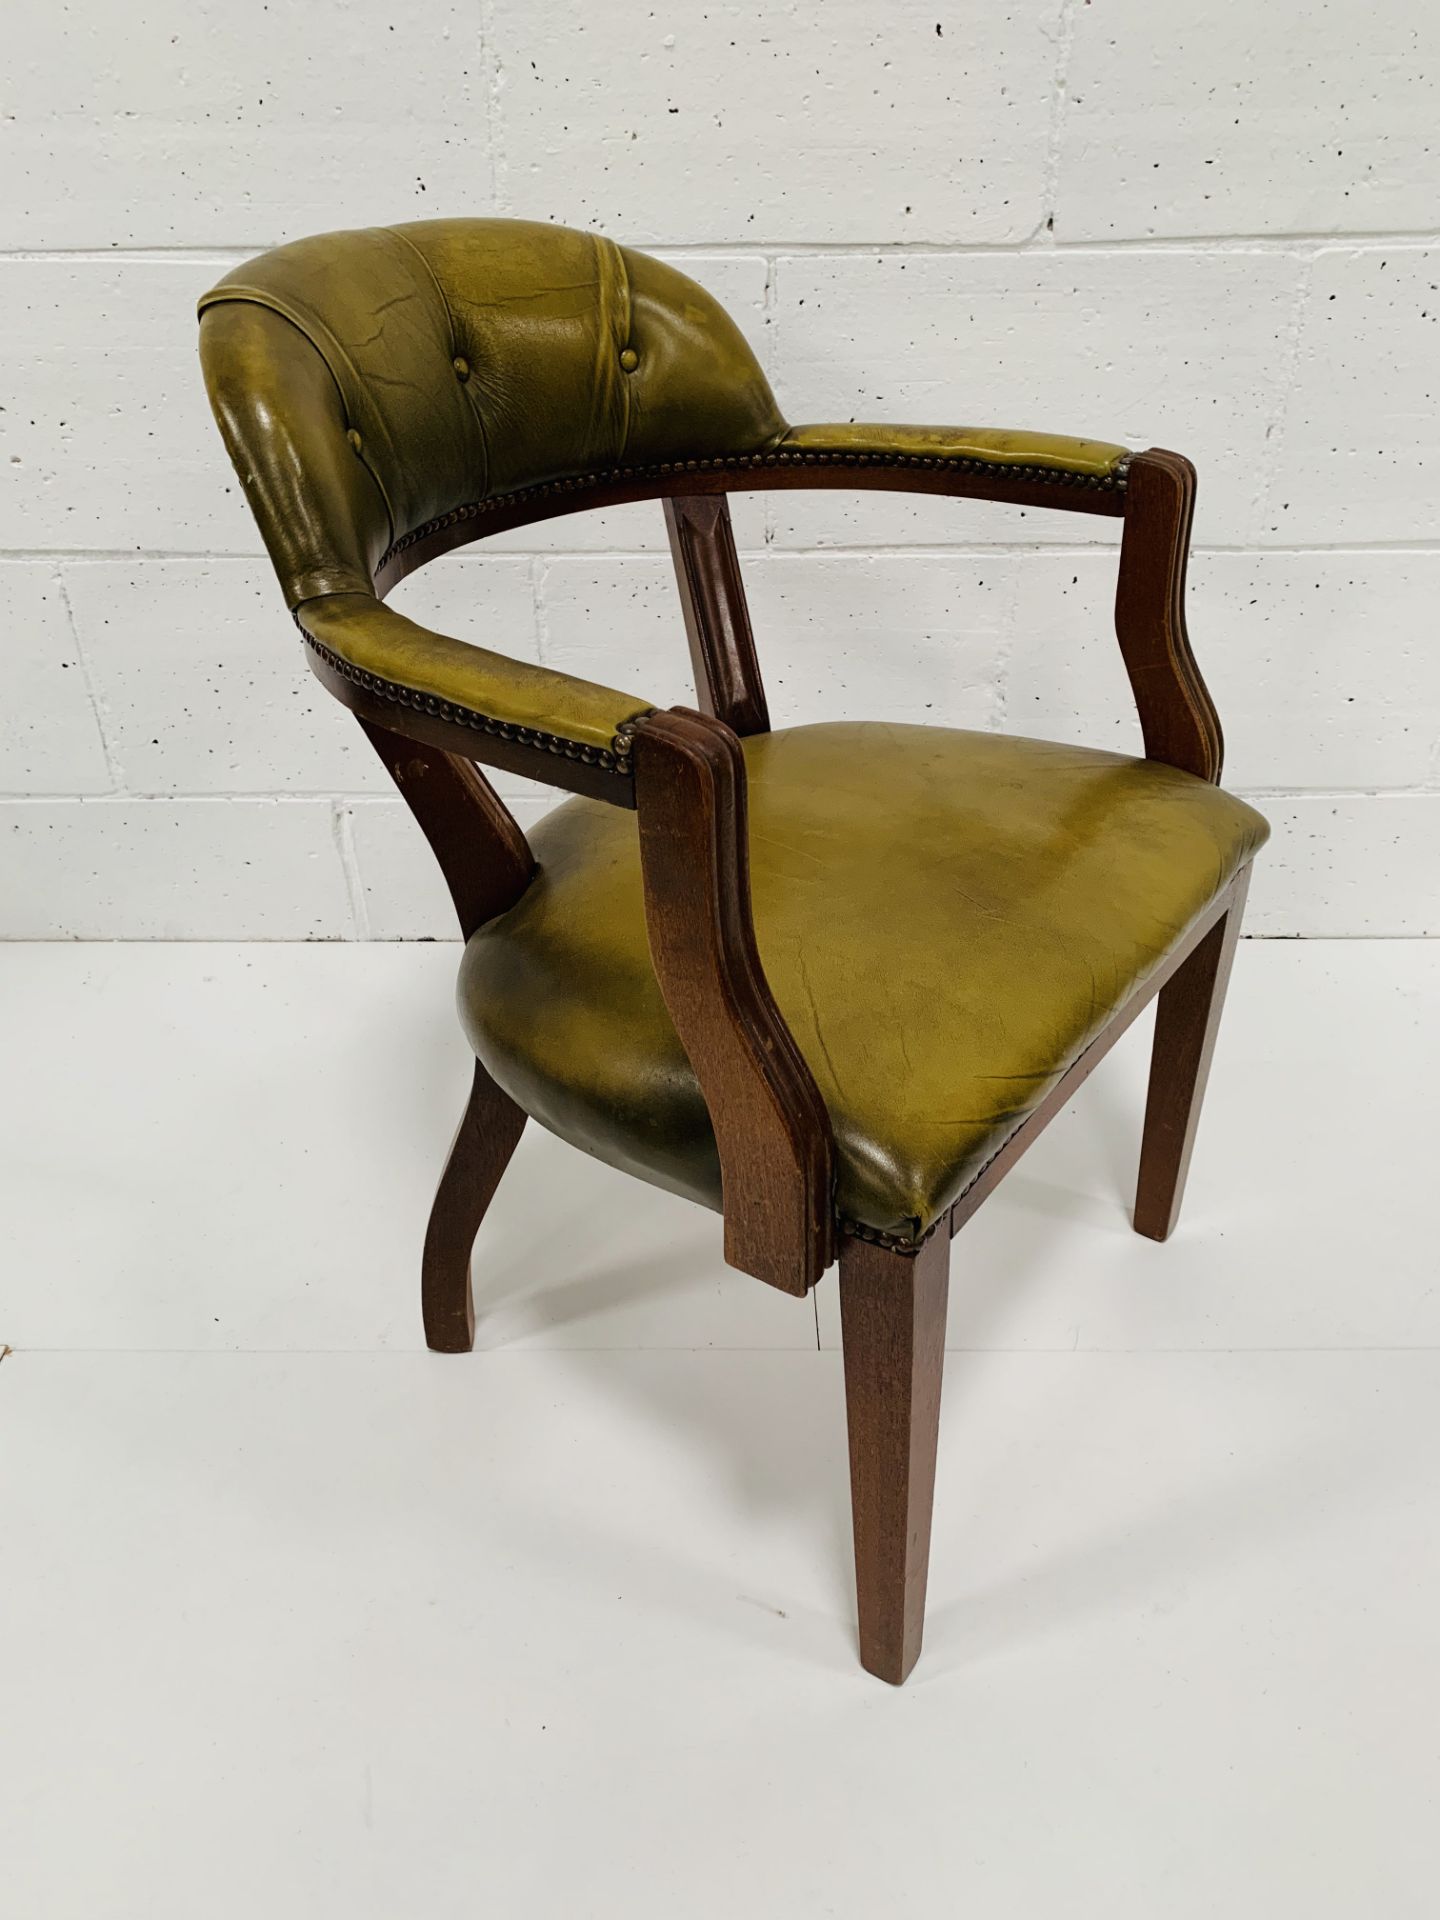 Green leather open armchair. - Image 3 of 3